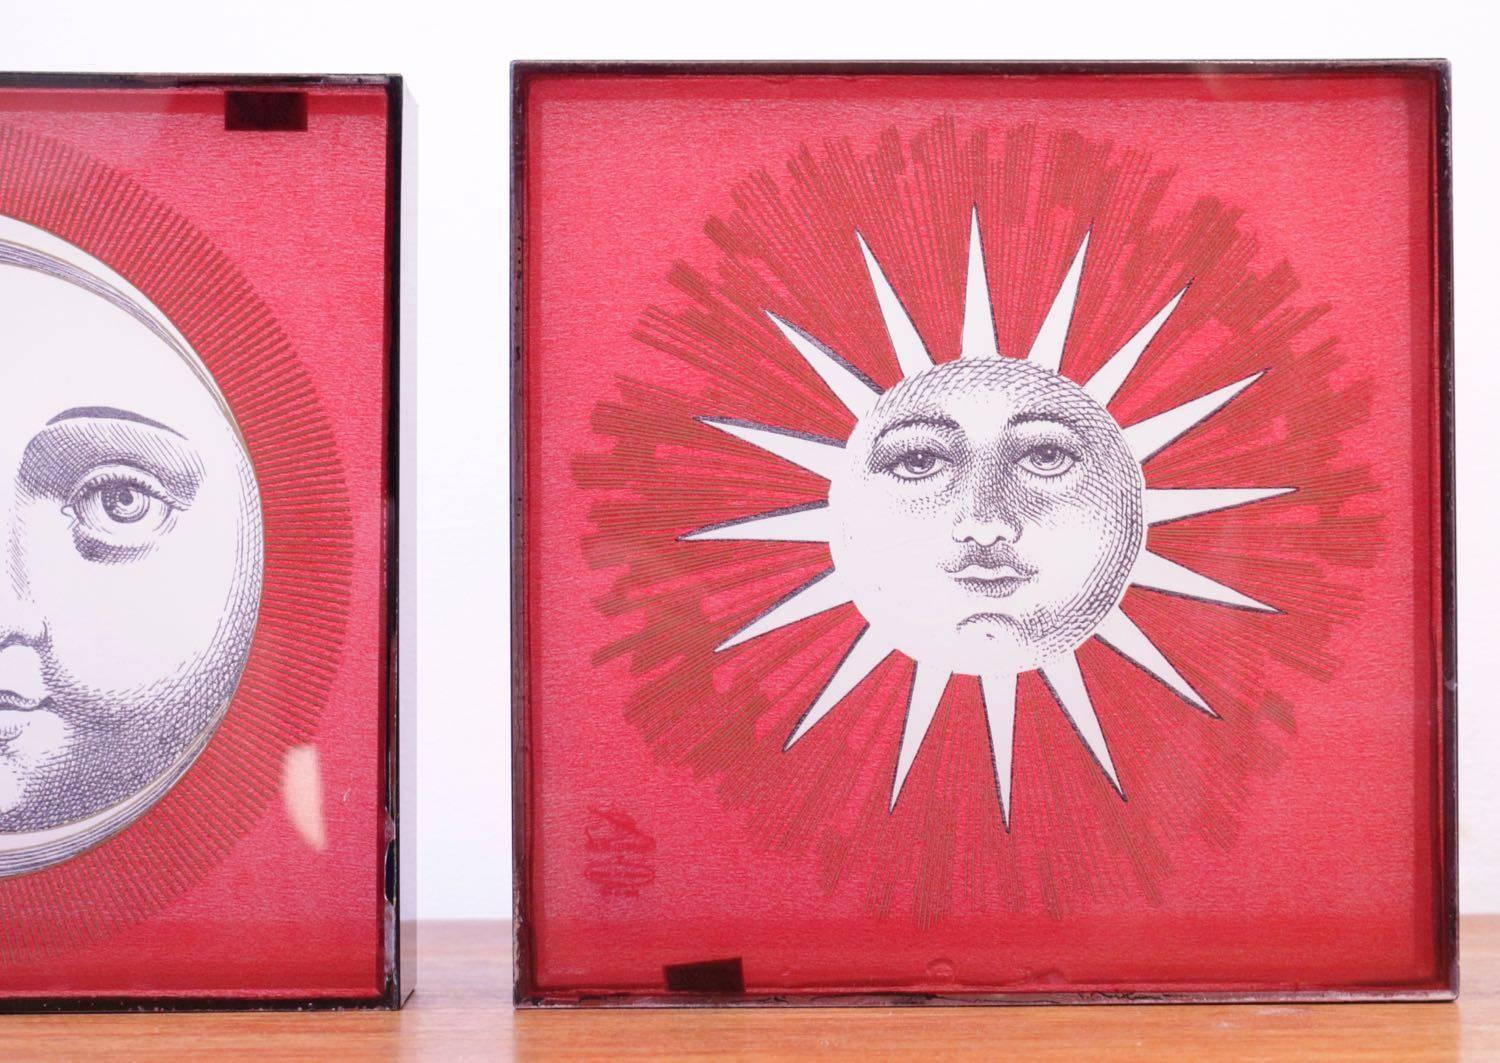 Rare pair of decorative Altuglas Fornasetti decorative elements edited by La Compania del Tabacco in the late 1970s.
From the series Sole e Lune,
One representing the moon, and the other the sun.